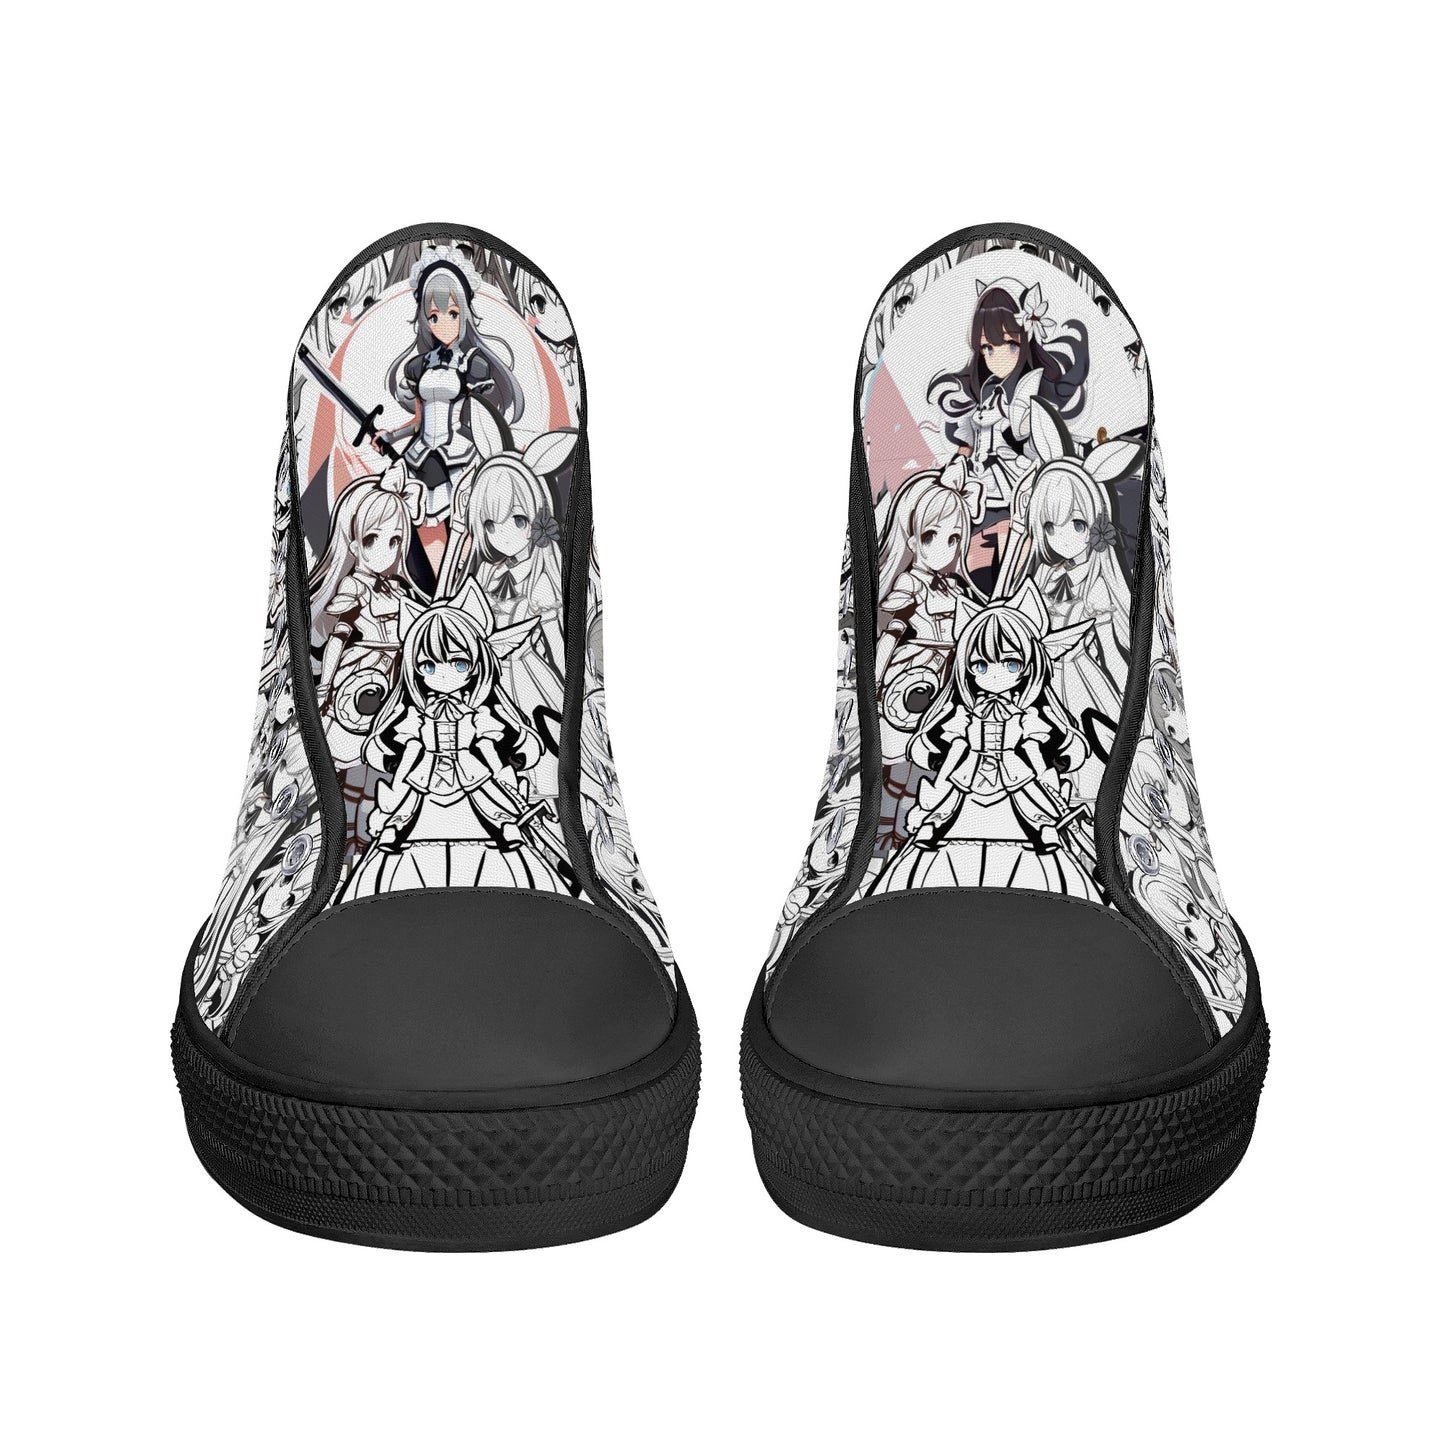 Anime Pattern Collection - Womens Classic High Top Canvas Shoes